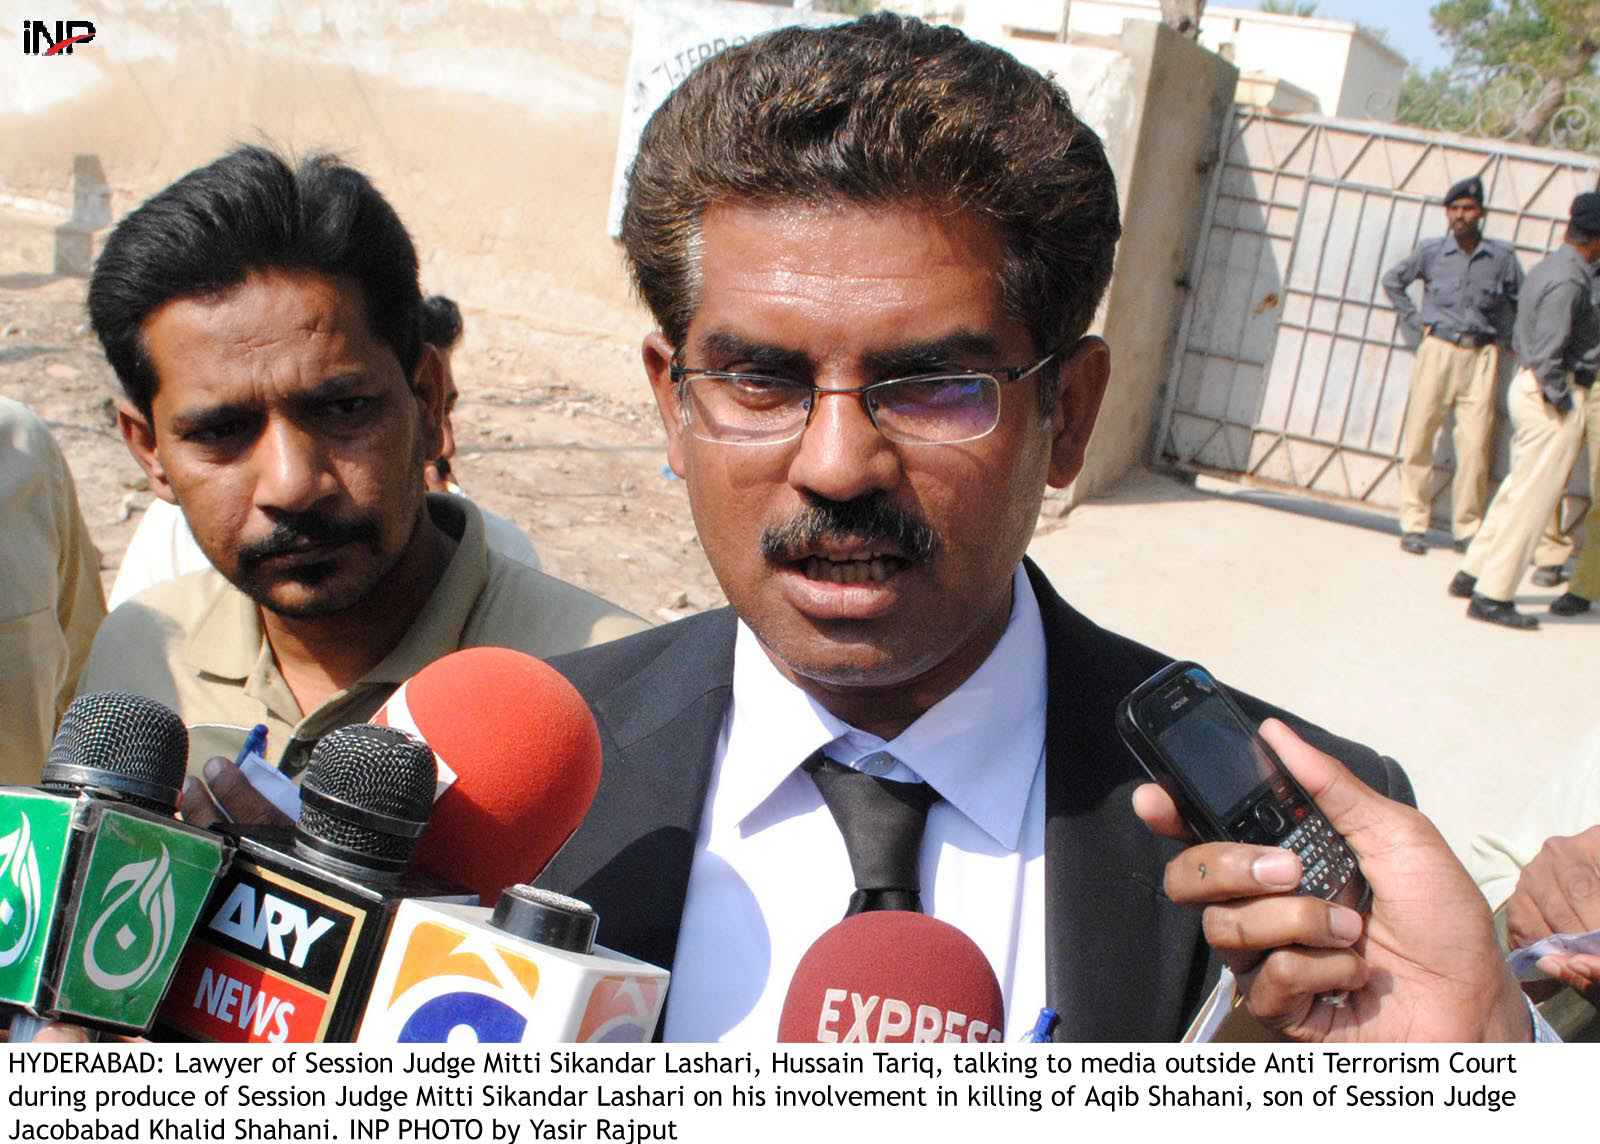 hussain tariq the lawyer for district and sessions judge mitti sikandar lashari speaks to media outside the anti terrorism court in hyderabad photo inp file